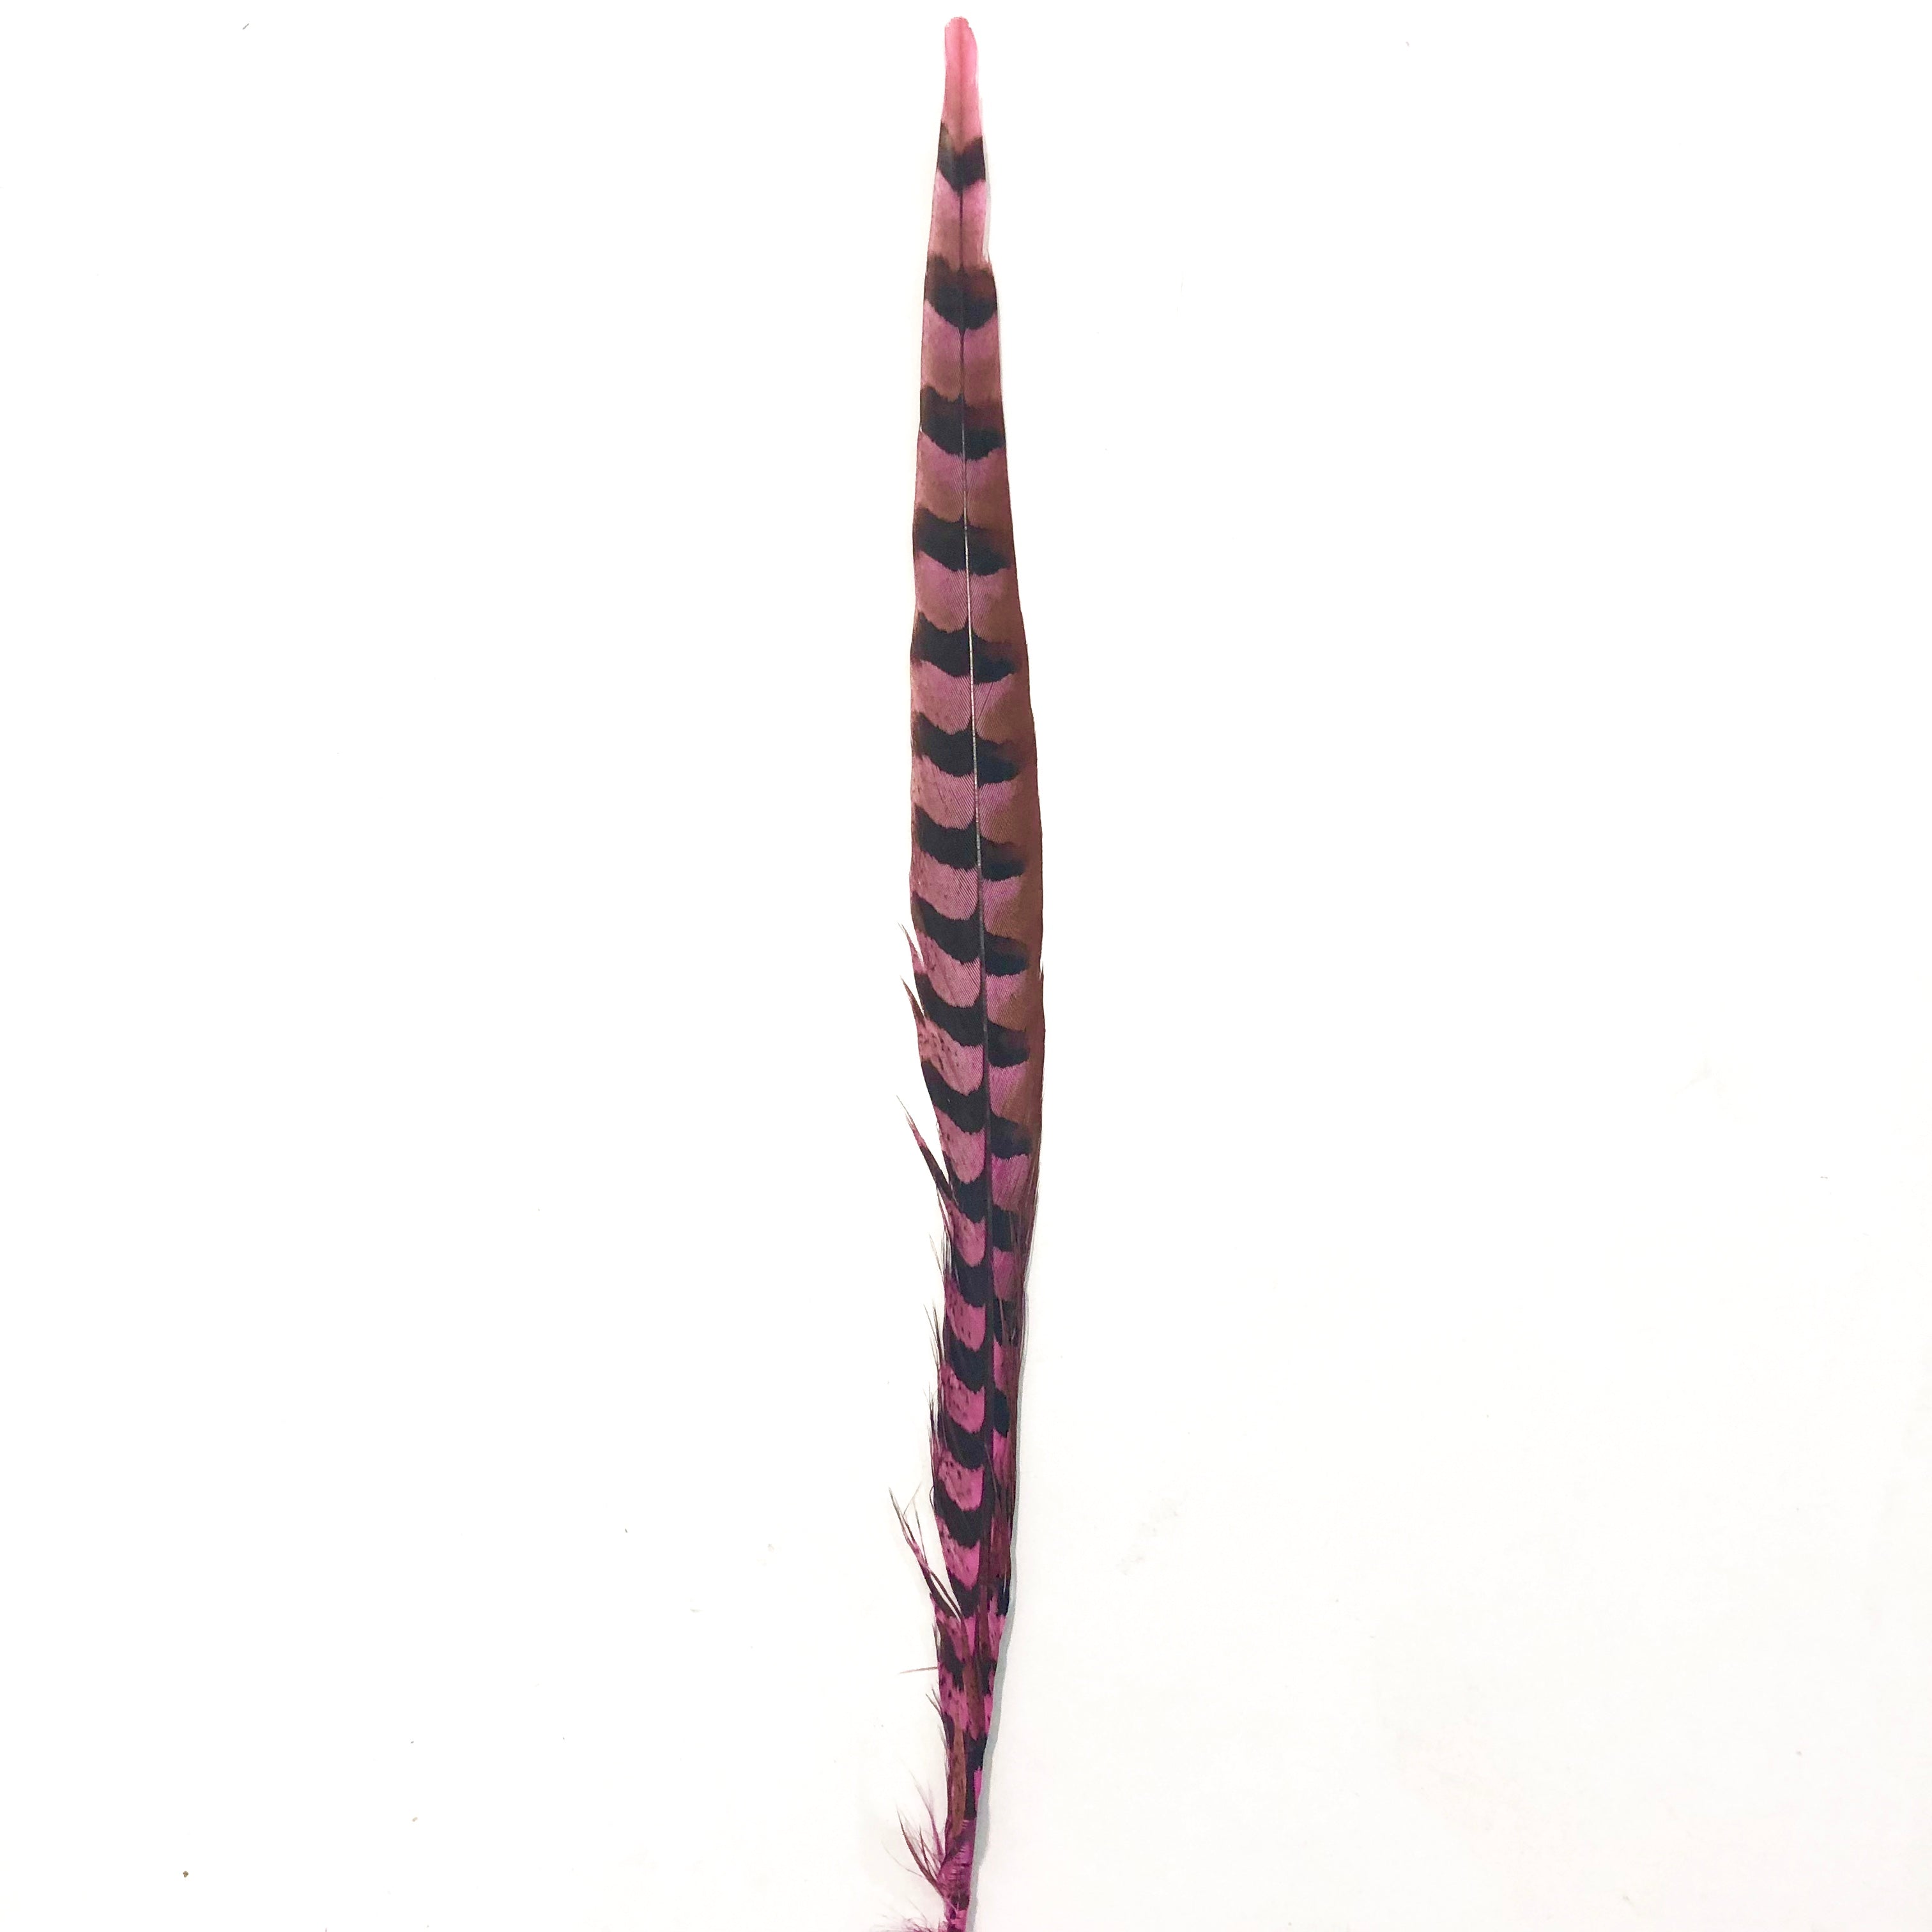 18" to 20" Reeves Pheasant Tail Feather - Hot Pink